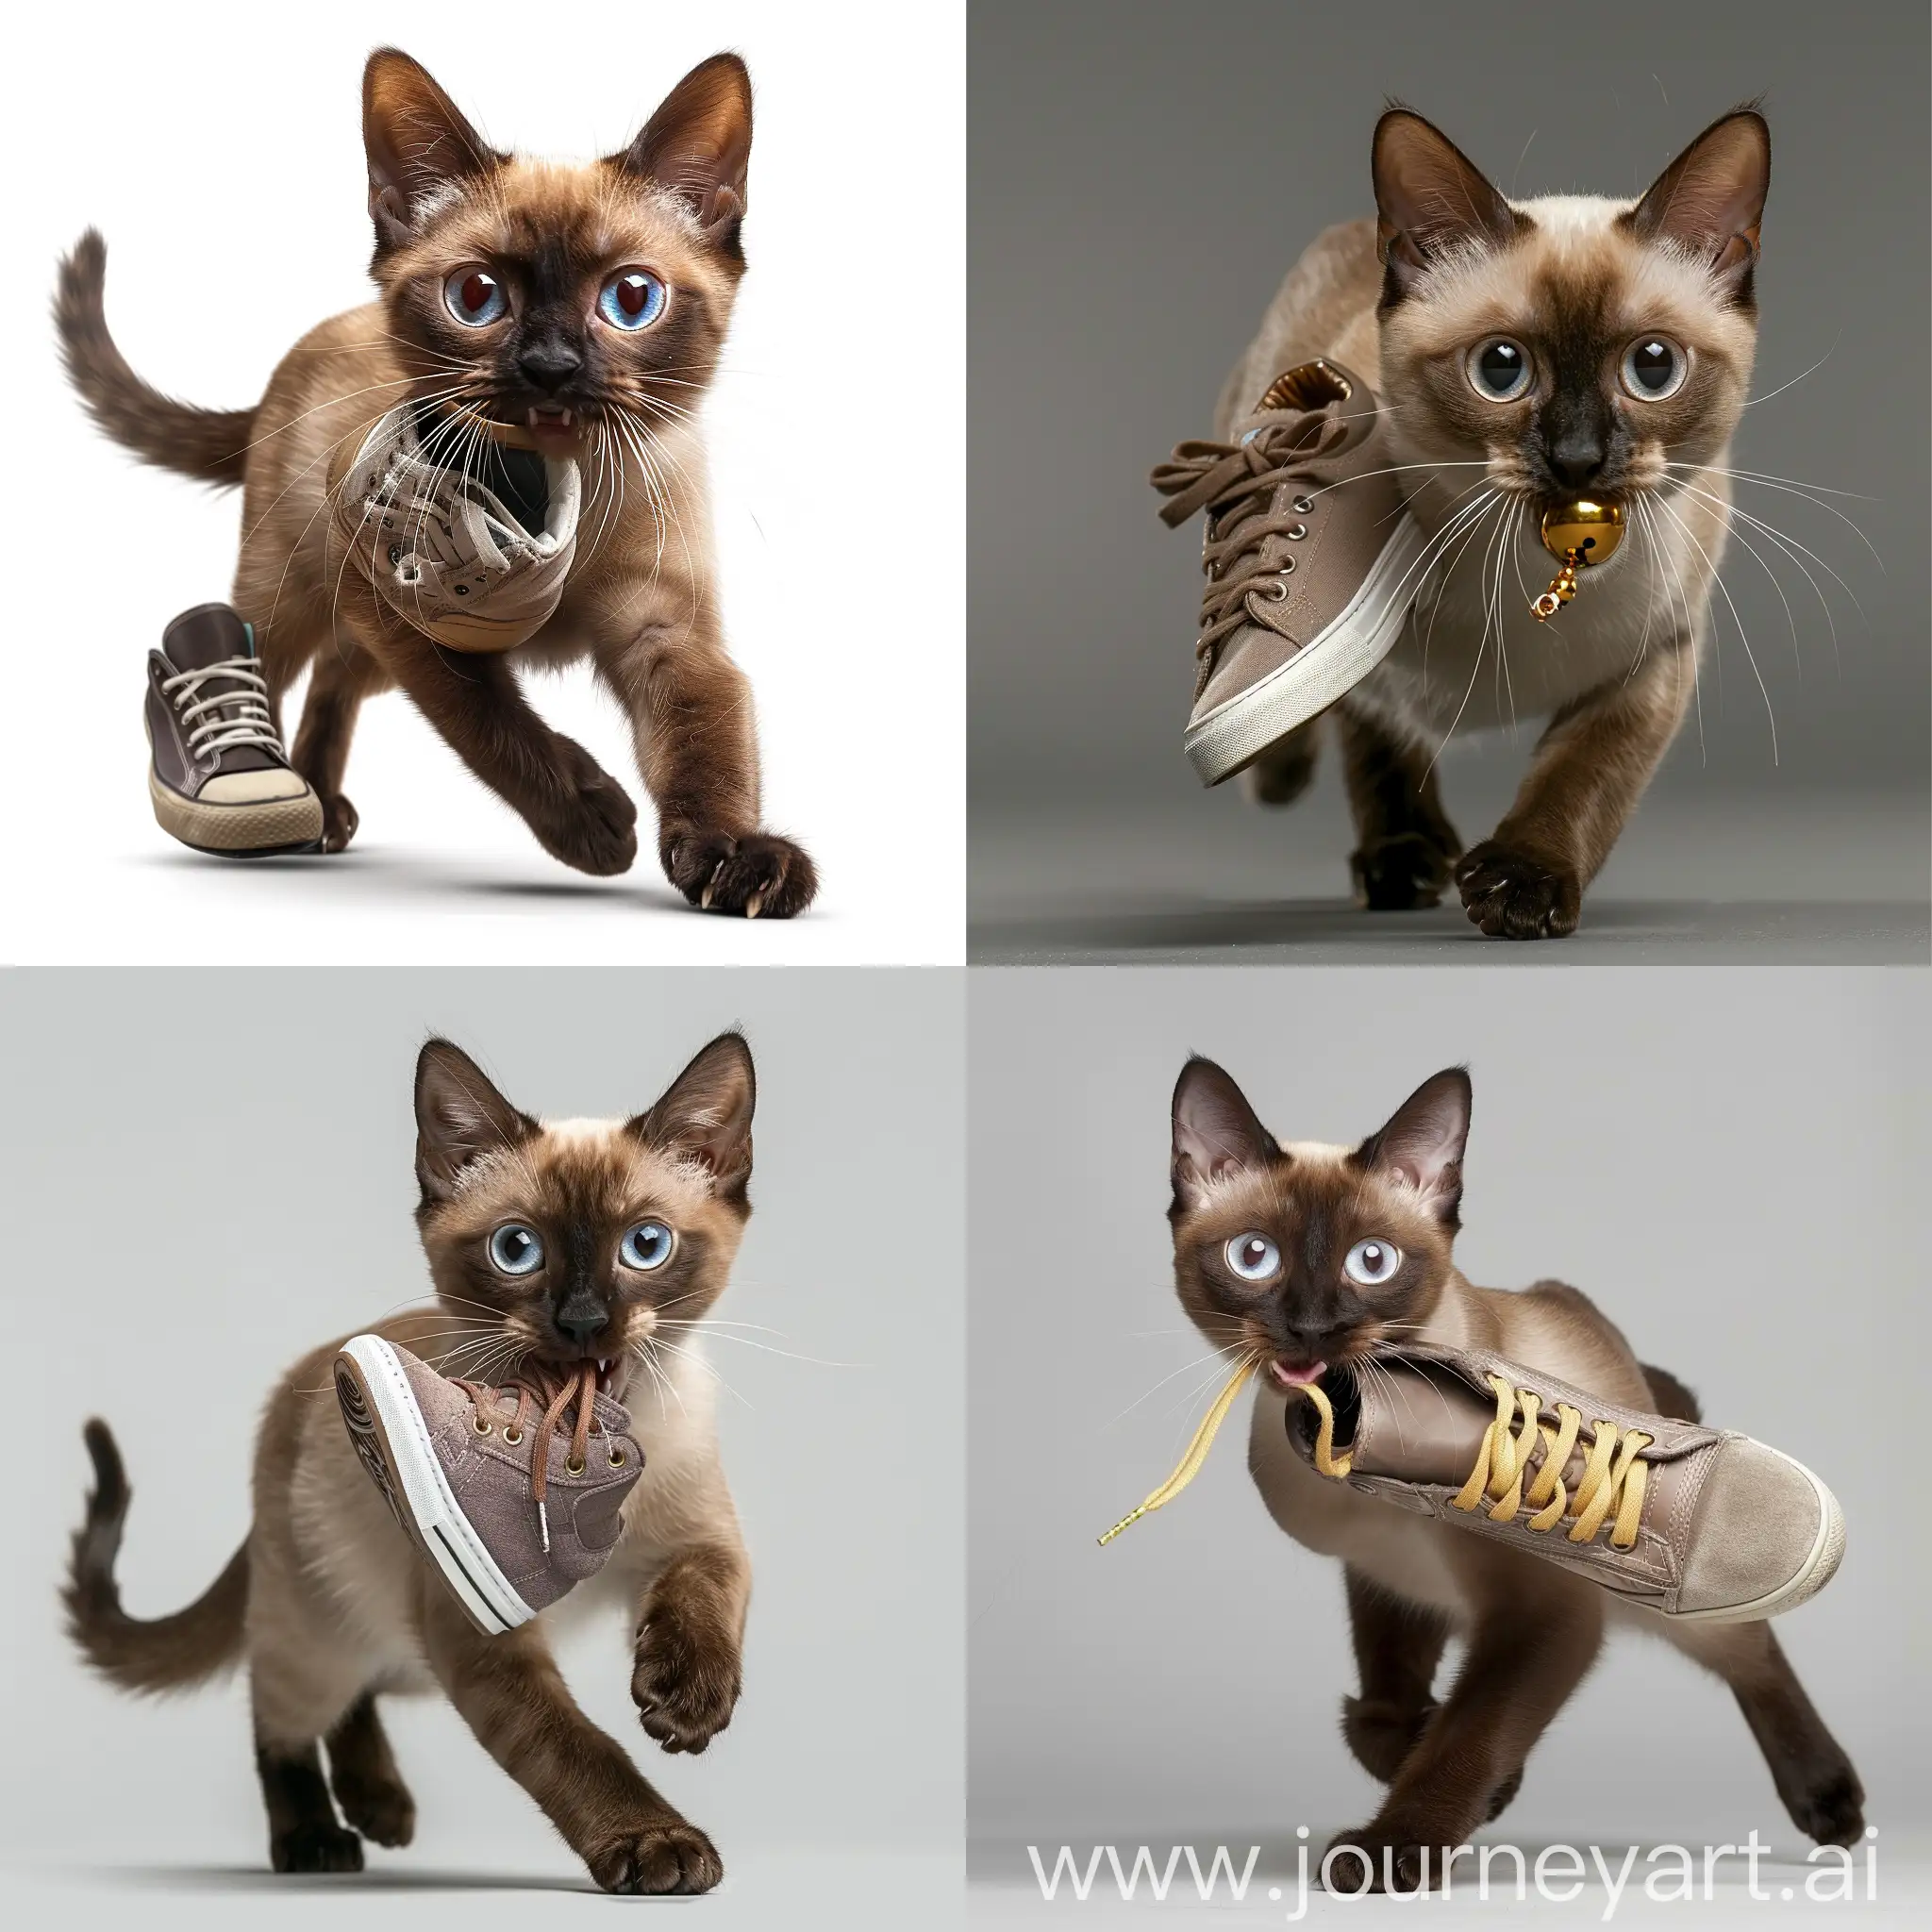 Realistic image. A cute burmese cat. Cat running with stolen sneakers in it's mouth. Cat has chocolate color